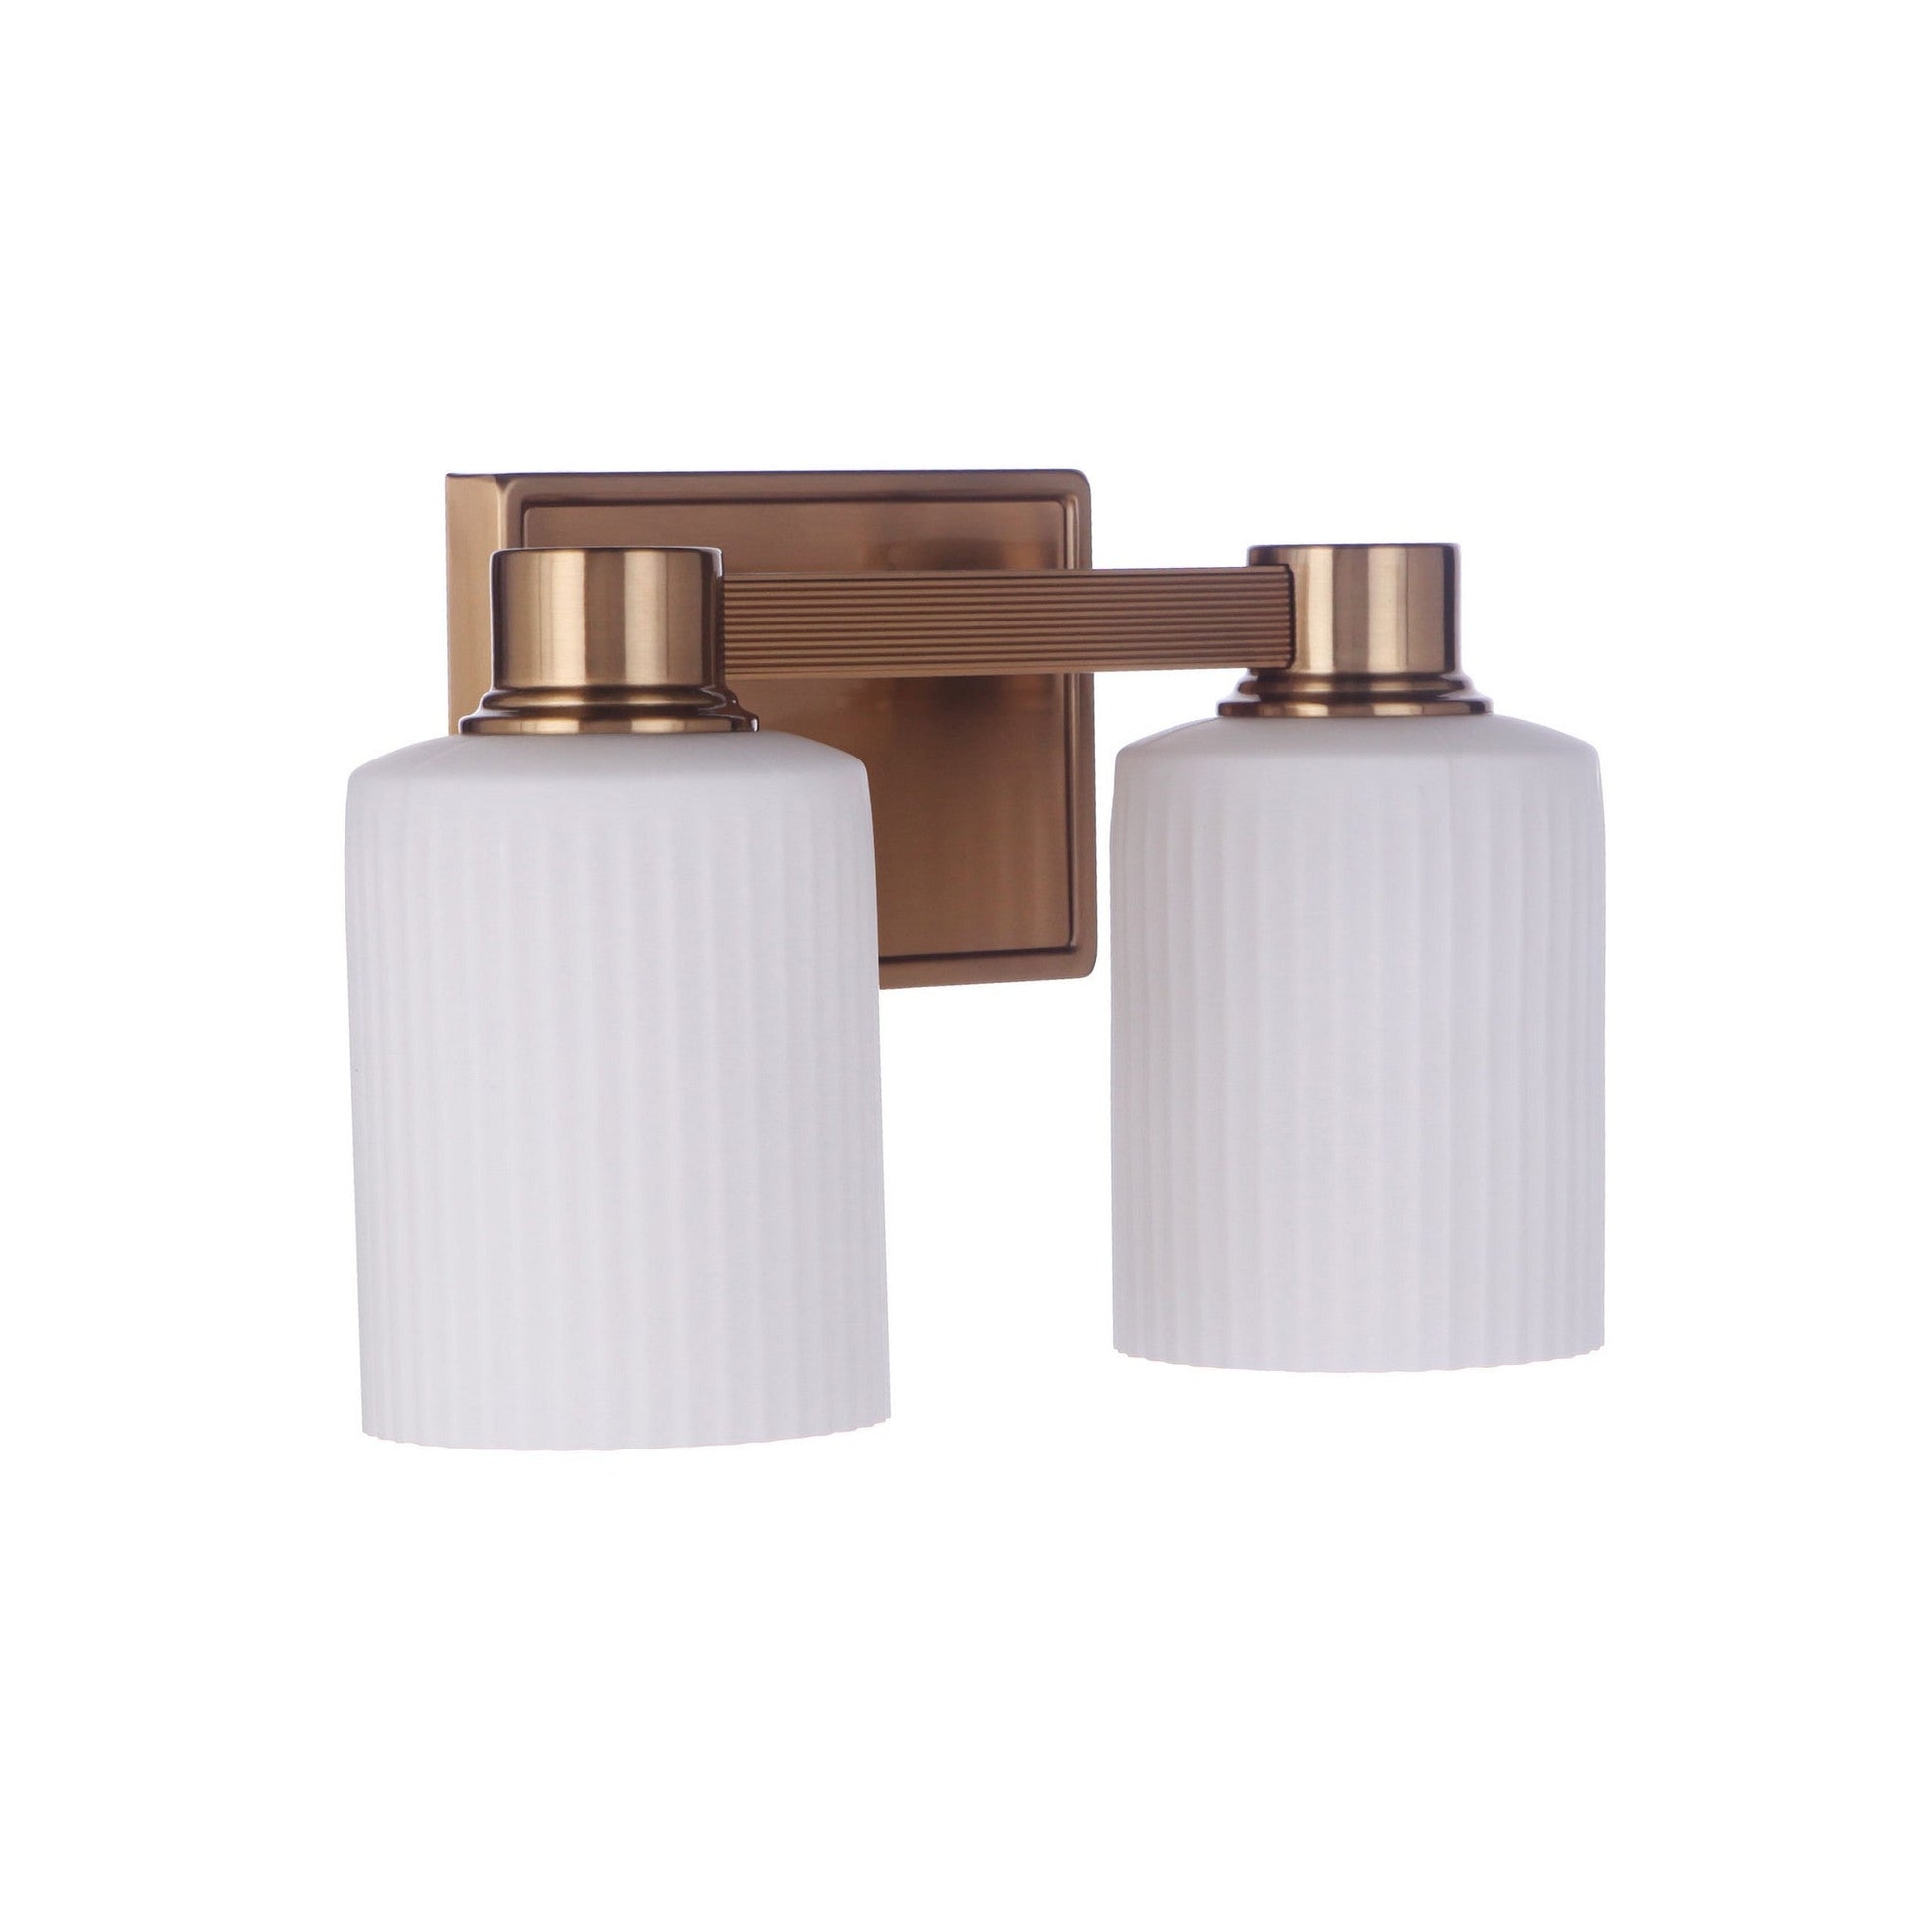 Craftmade Bretton 12" 2-Light Satin Brass Vanity Light With White Fluted Glass Shades